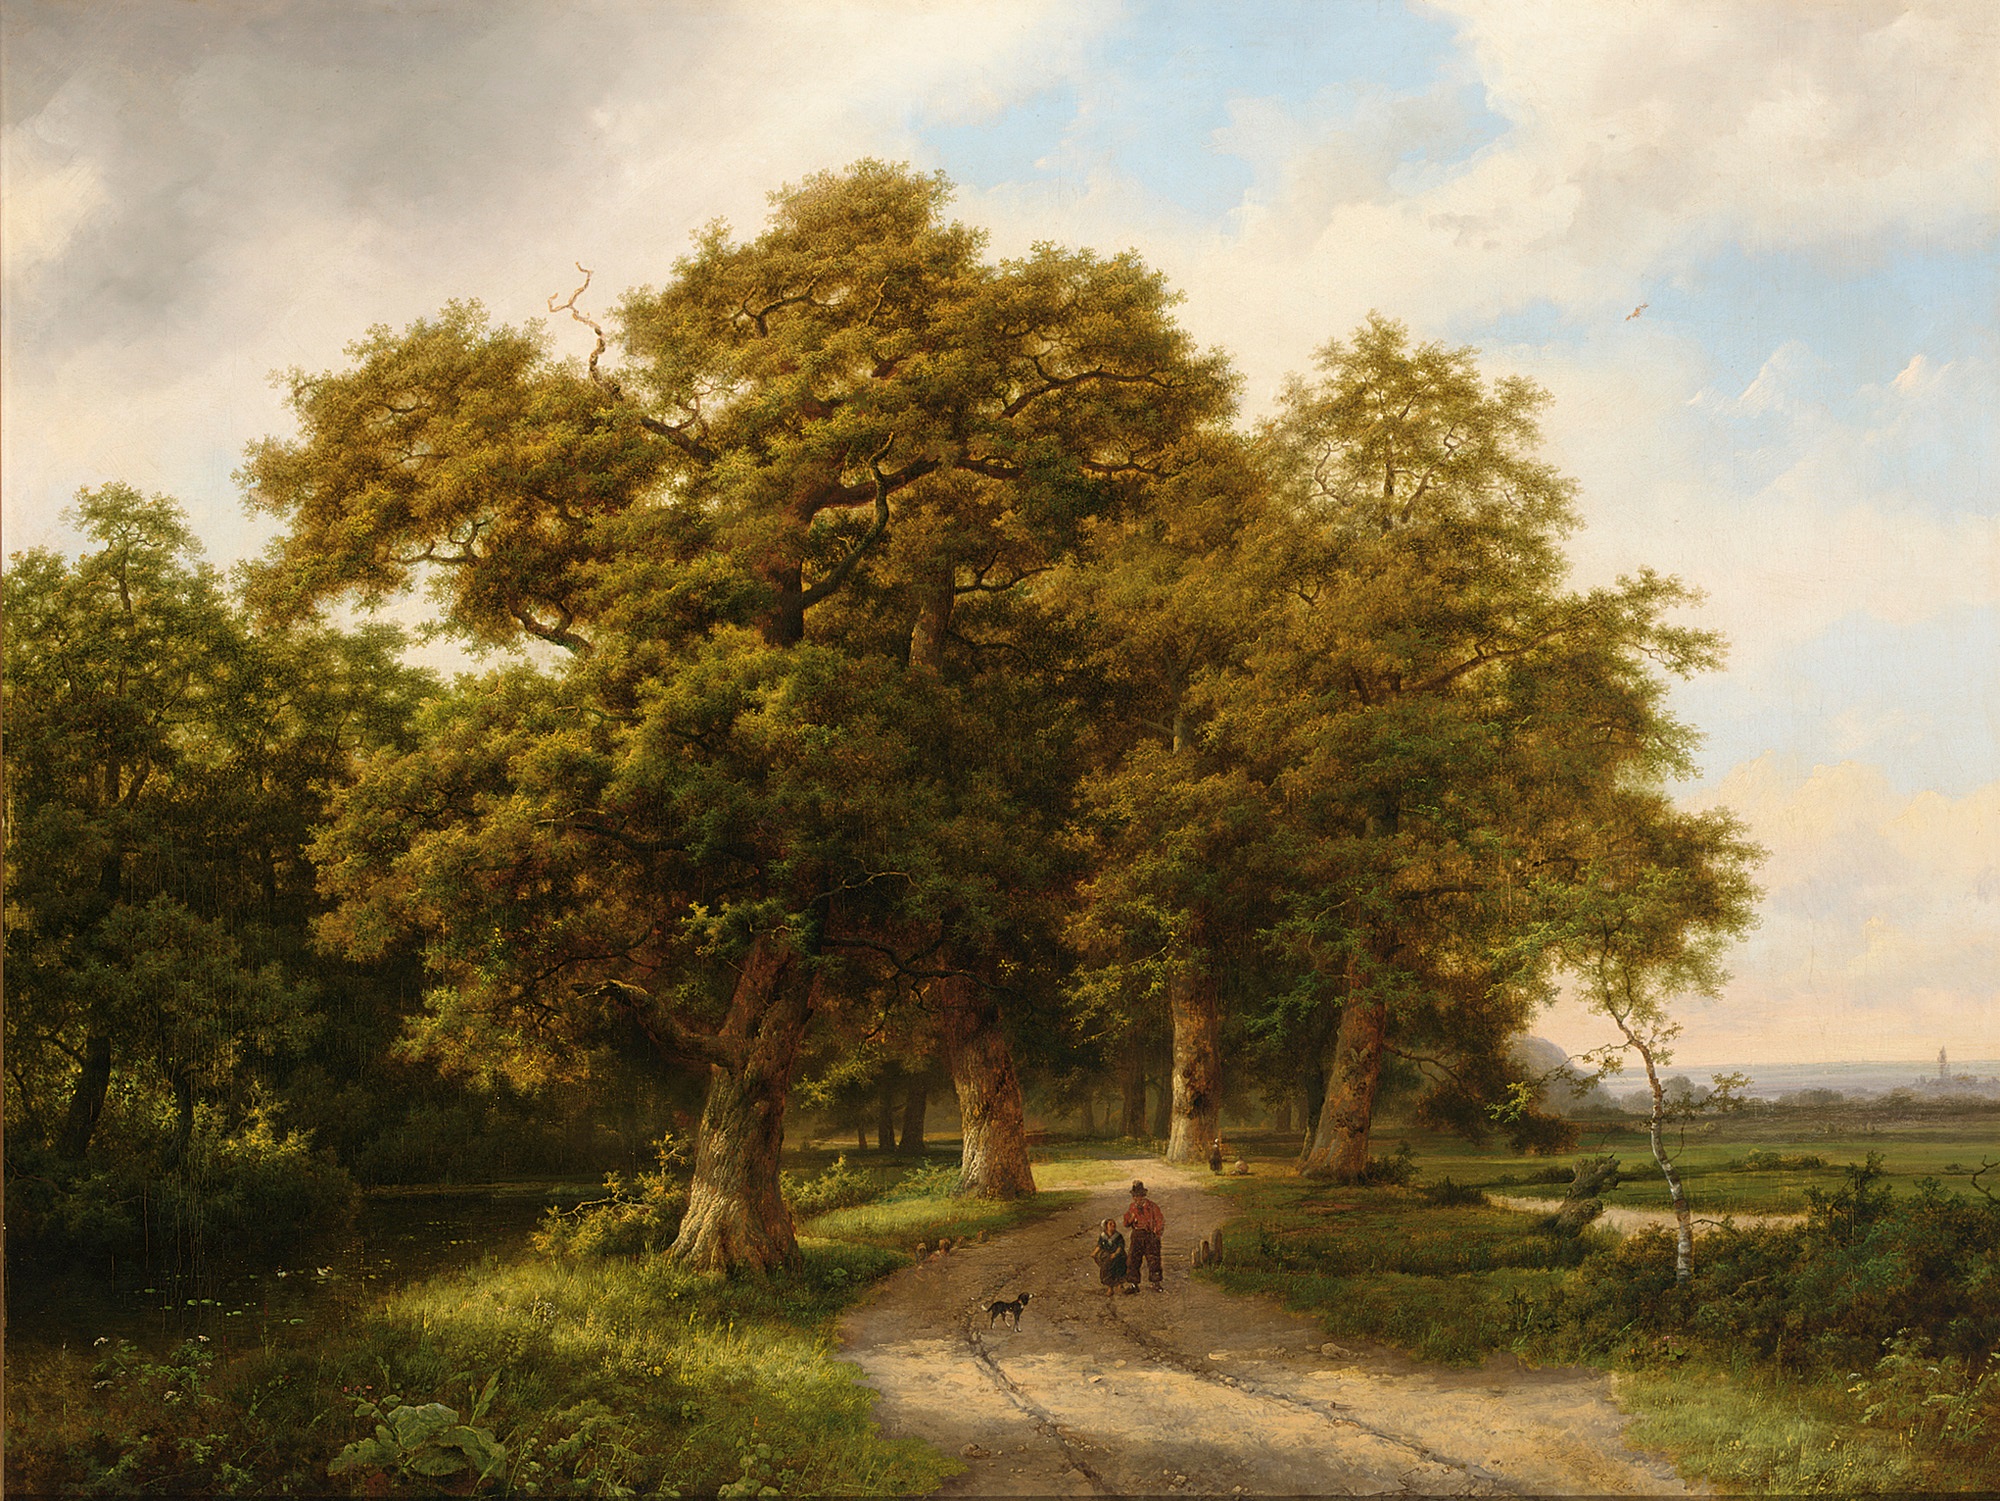 Marinus Adrianus Koekkoek - A wooded landscape with figures on a country road (1861)